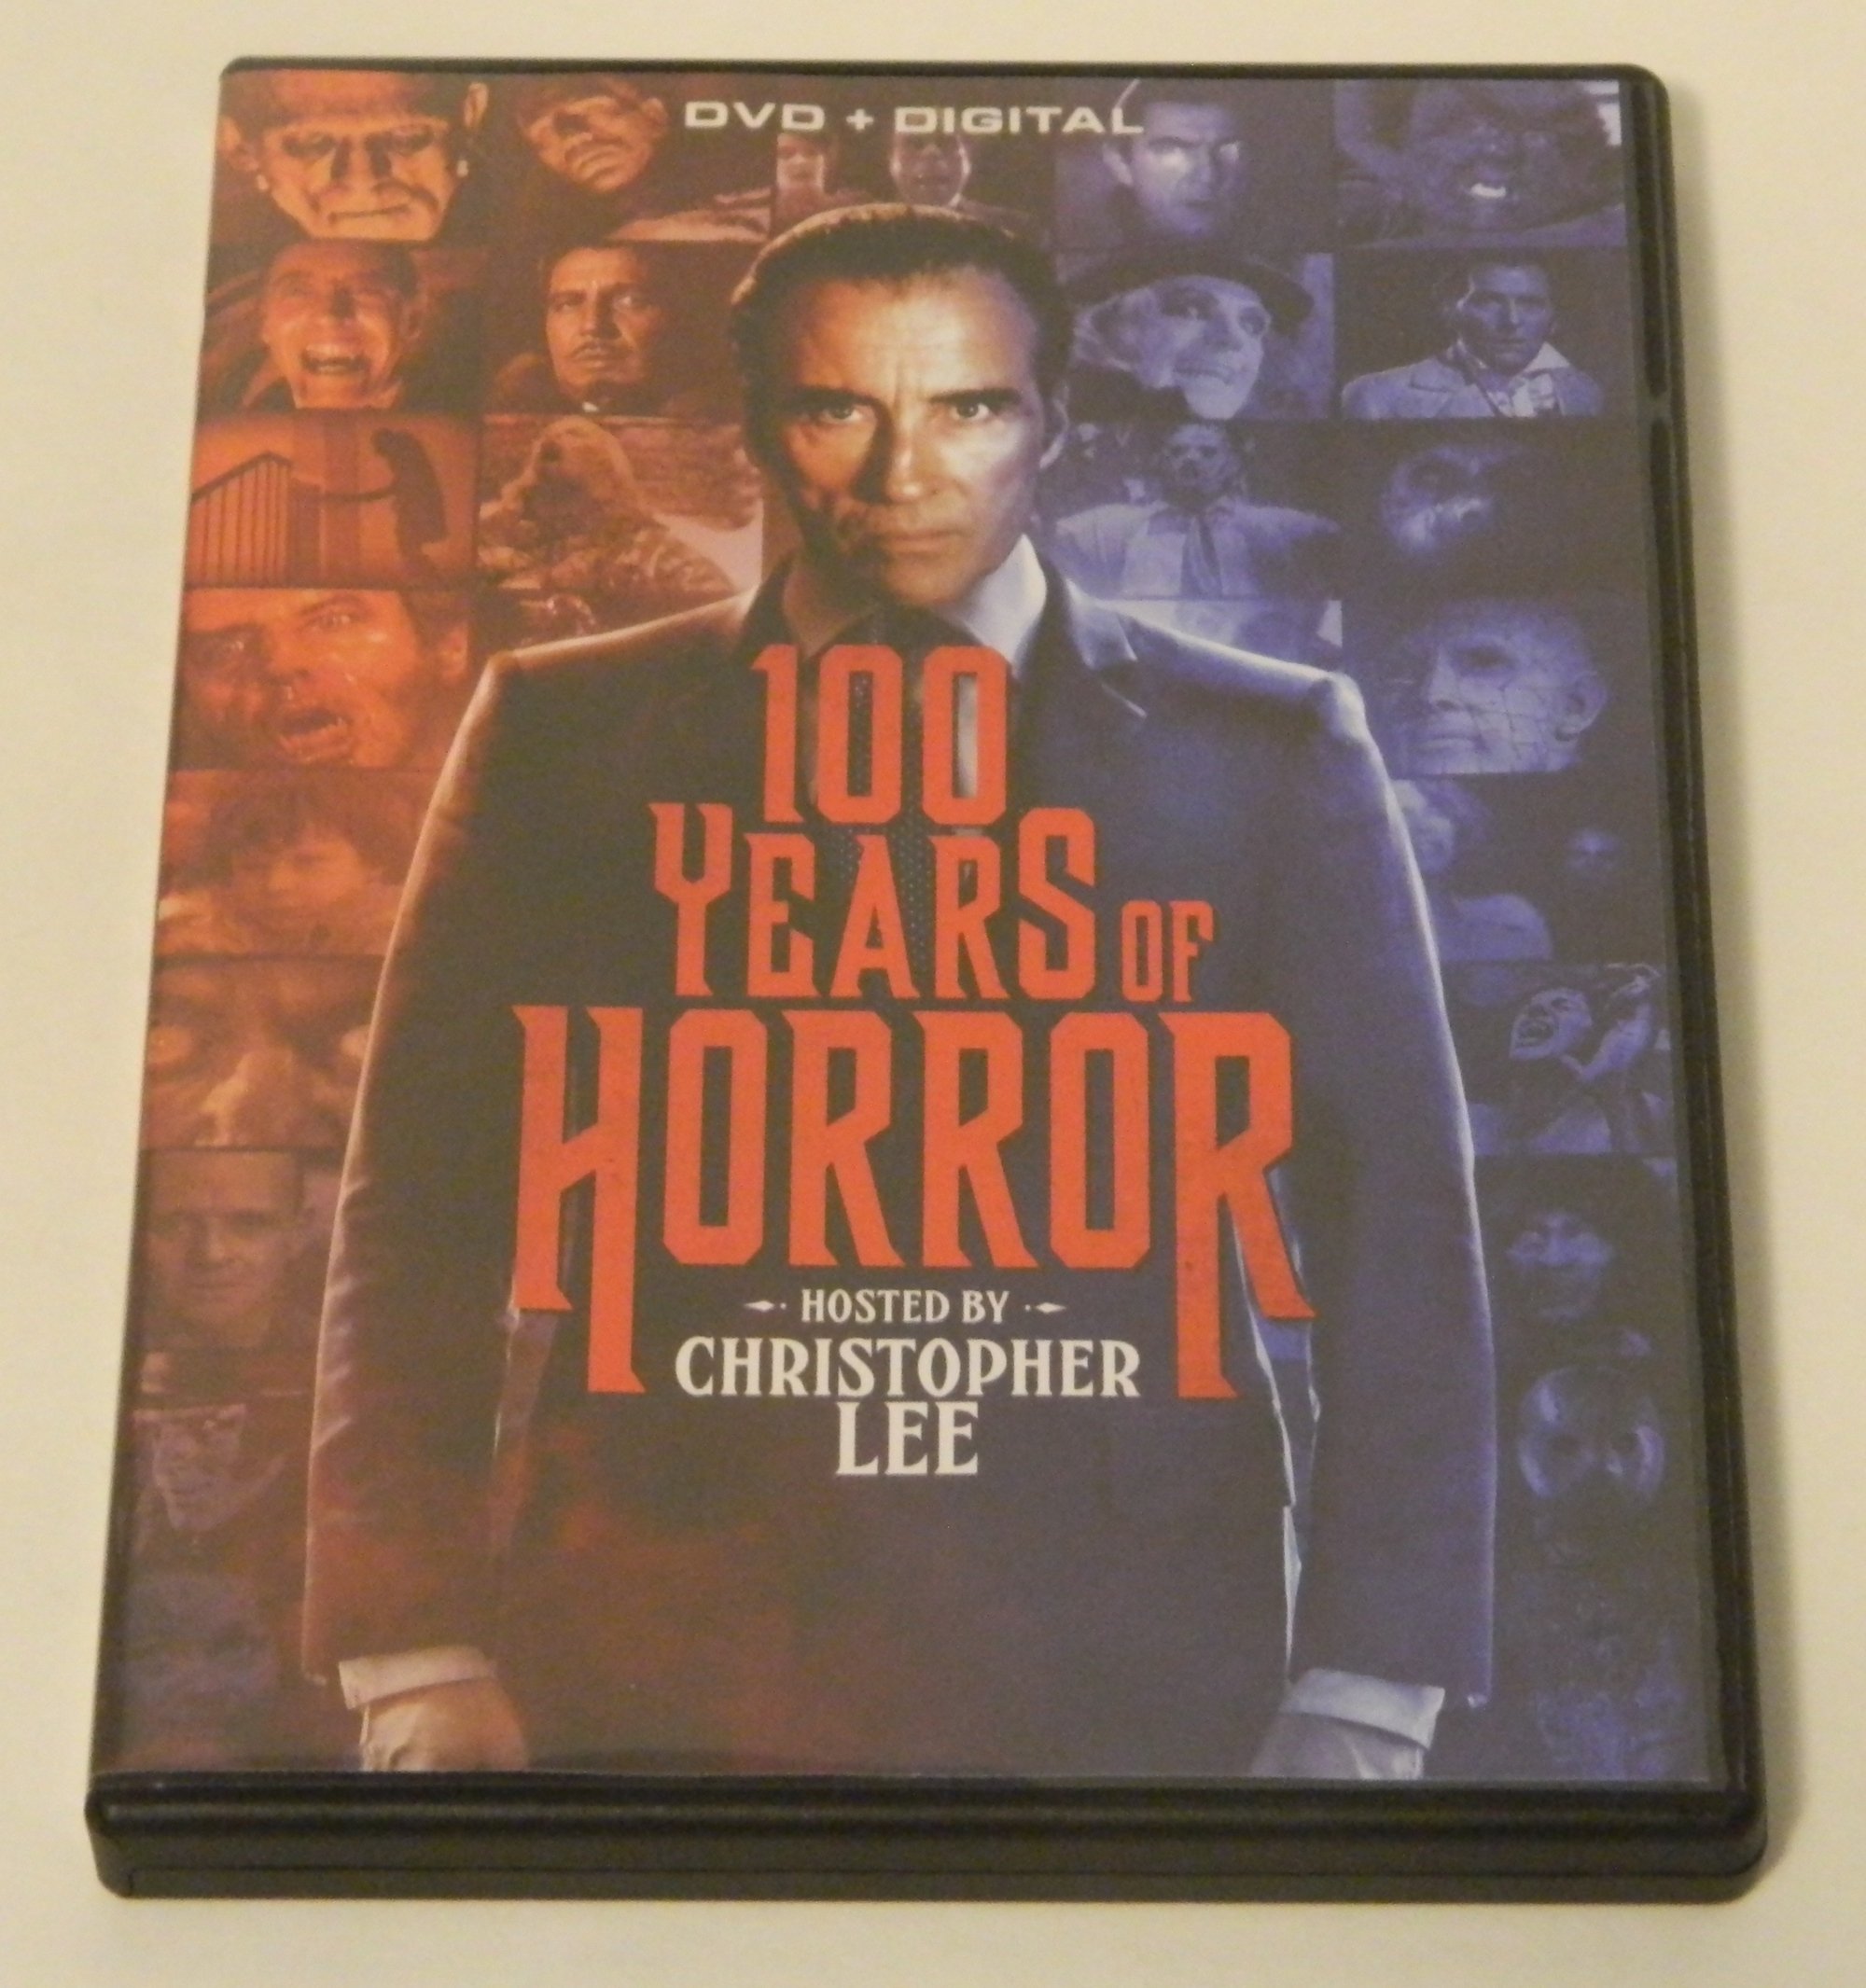 100 Years of Horror DVD Review